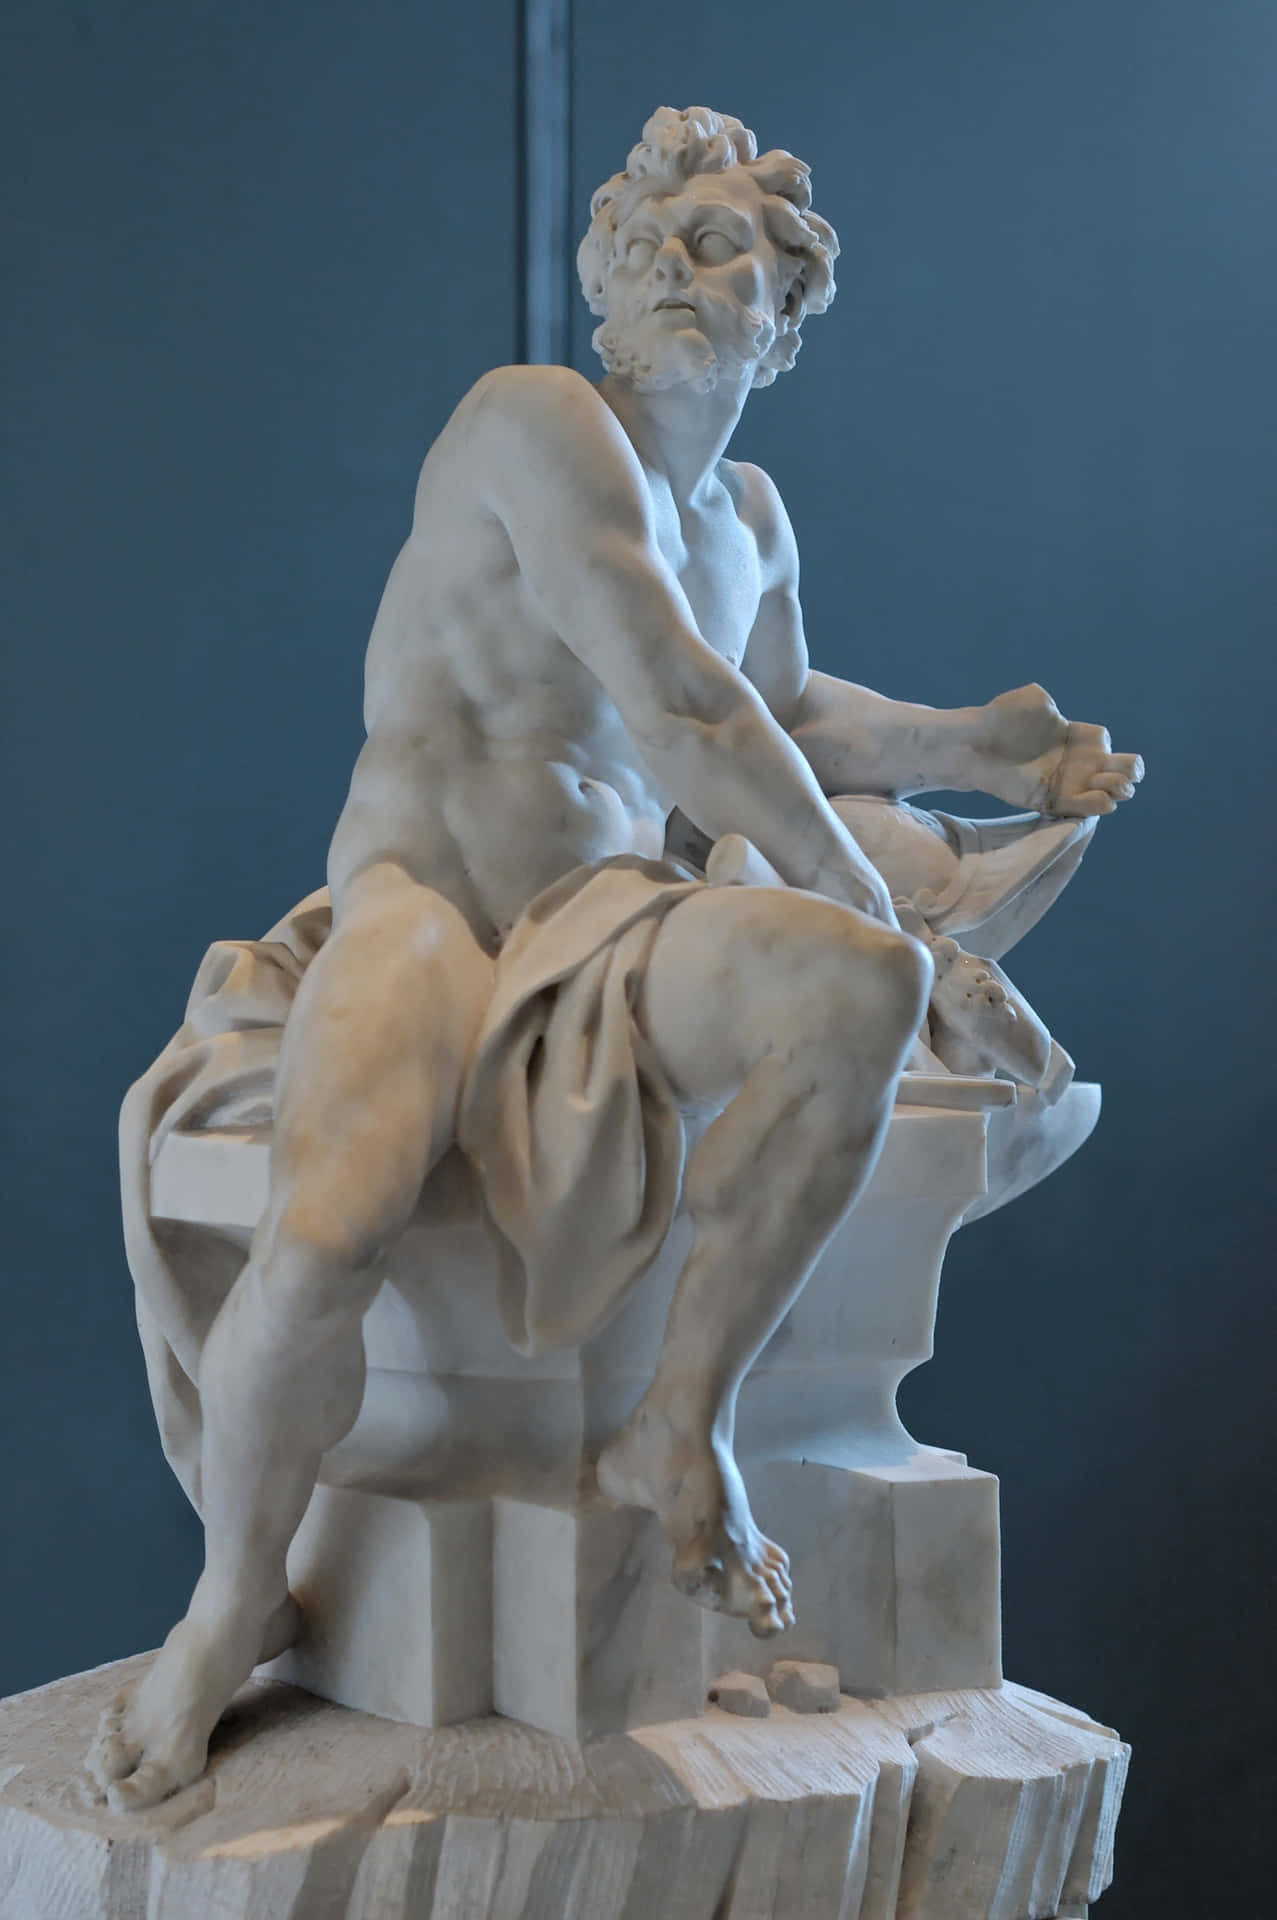 A Statue Of A Man Sitting On A Rock